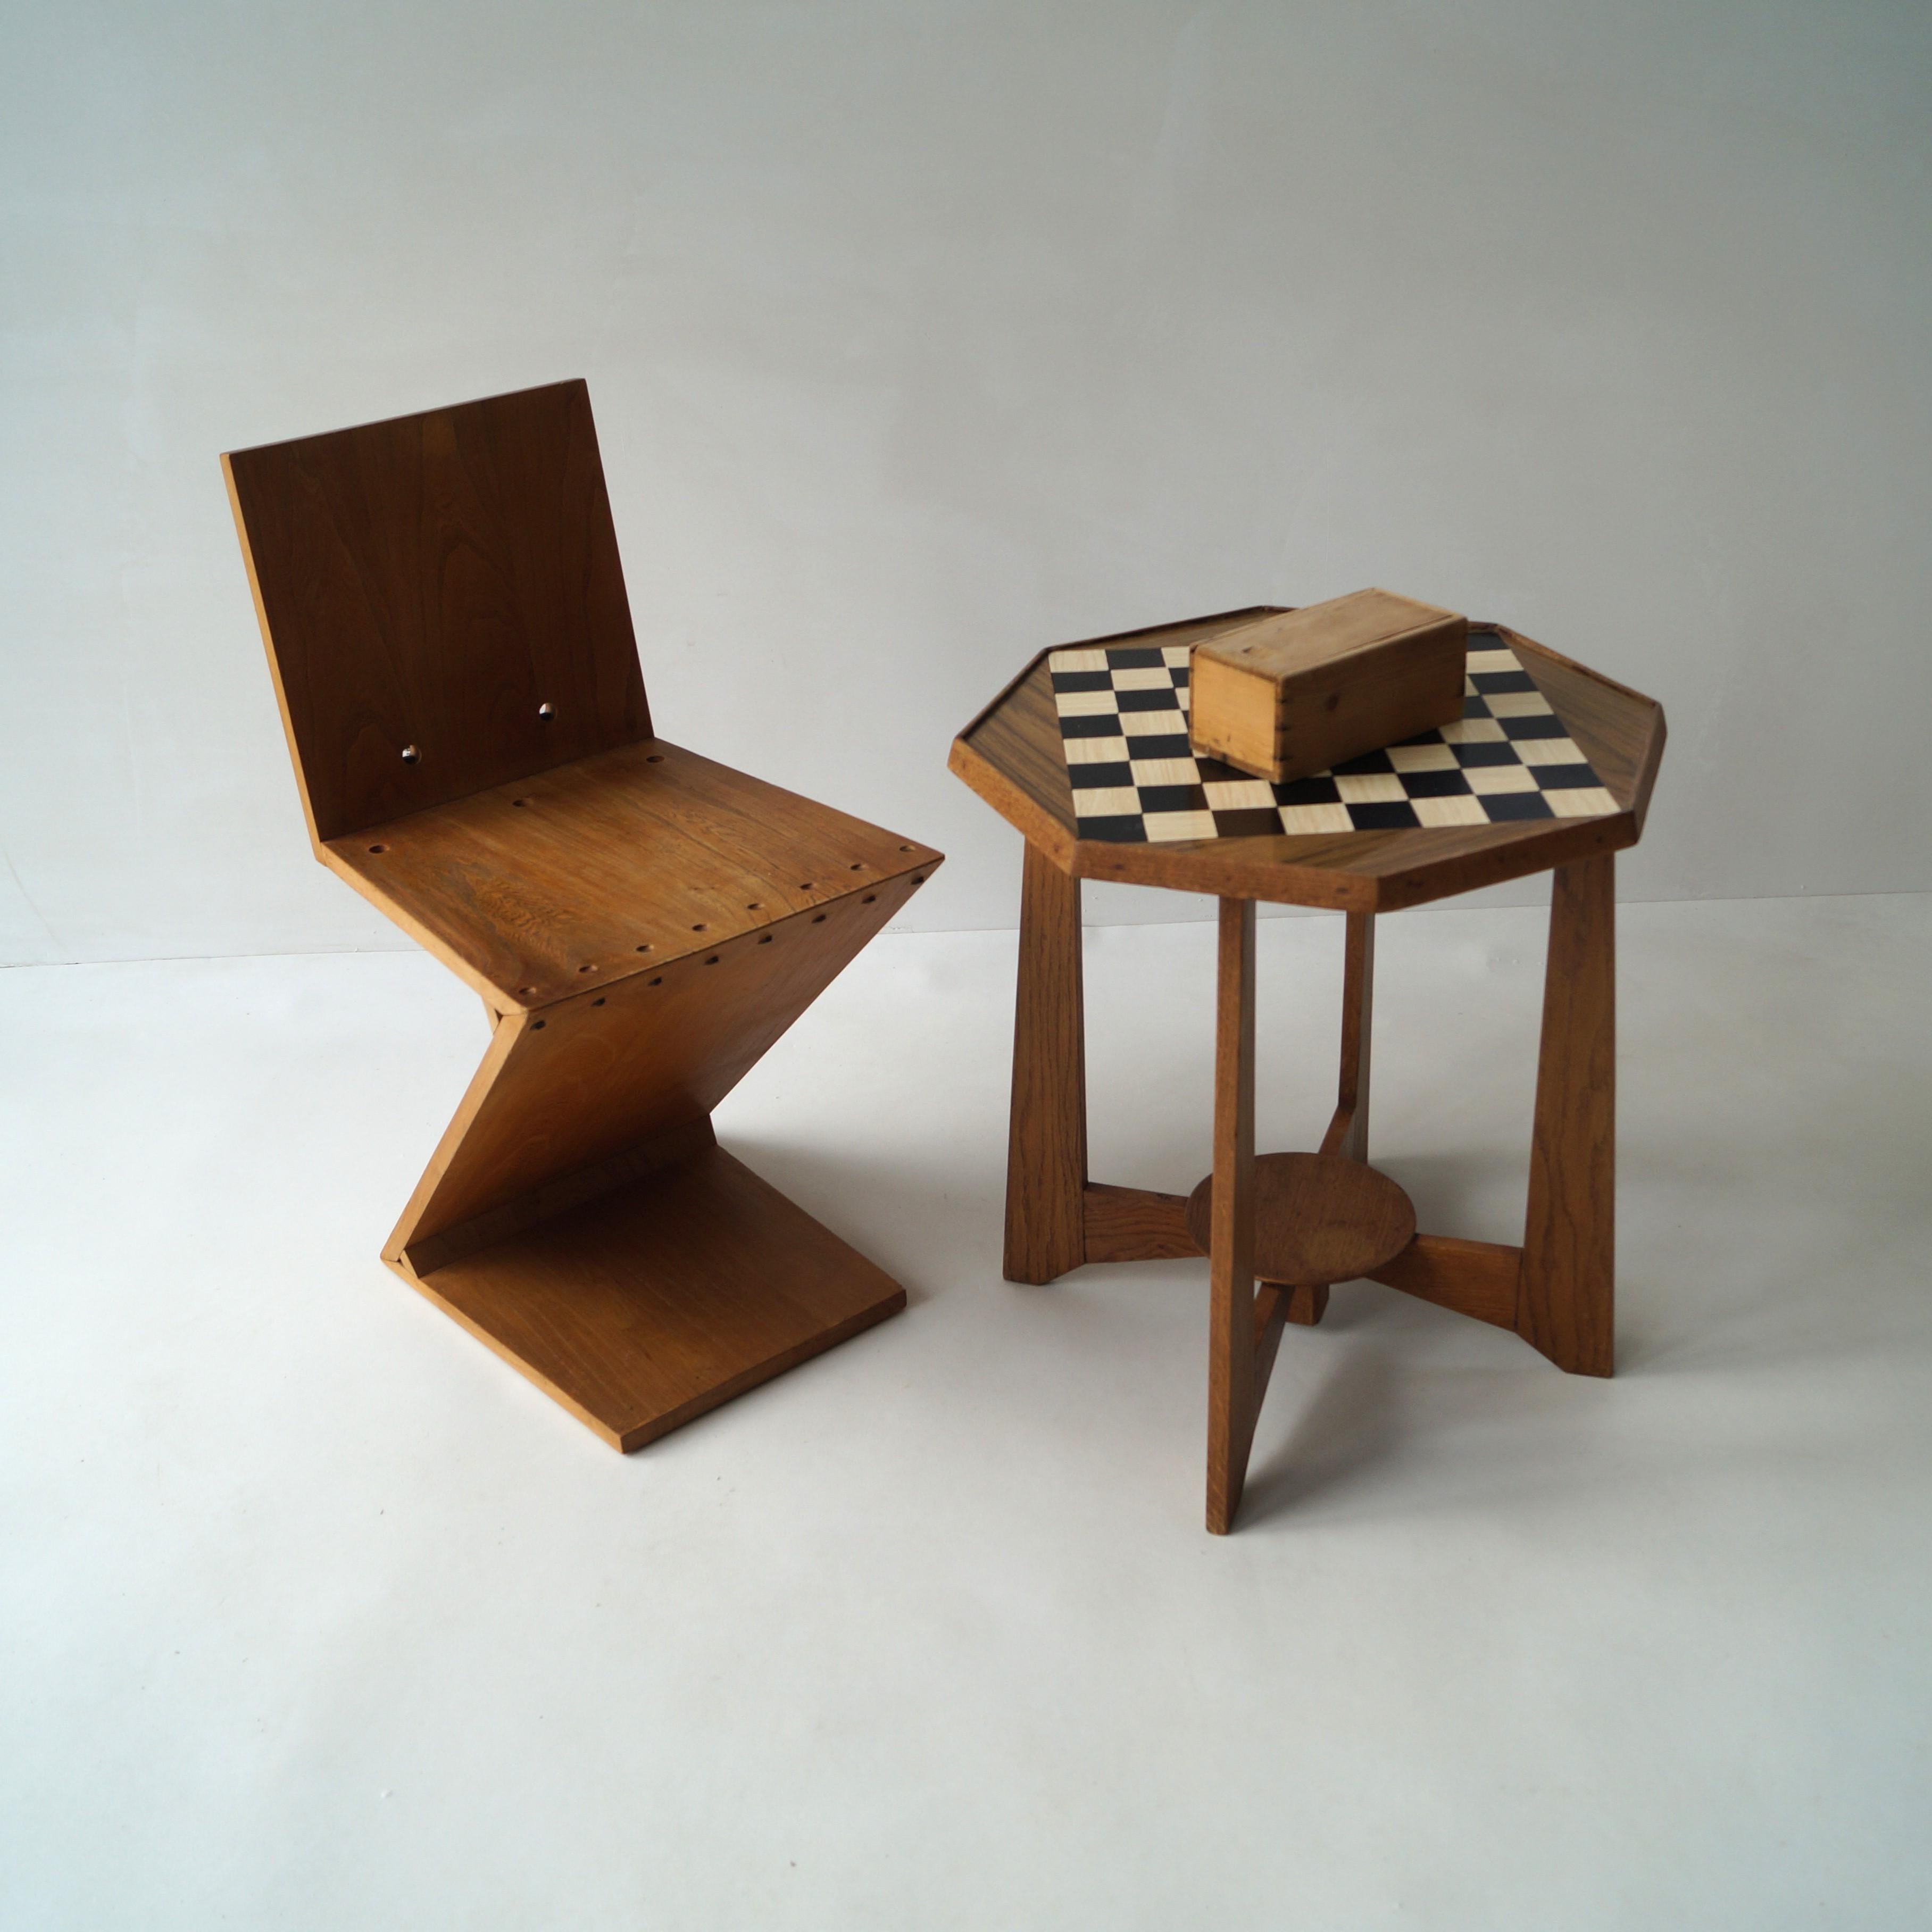 Dutch Art Deco octagonal chess table and chess set, ca. 1950s 11